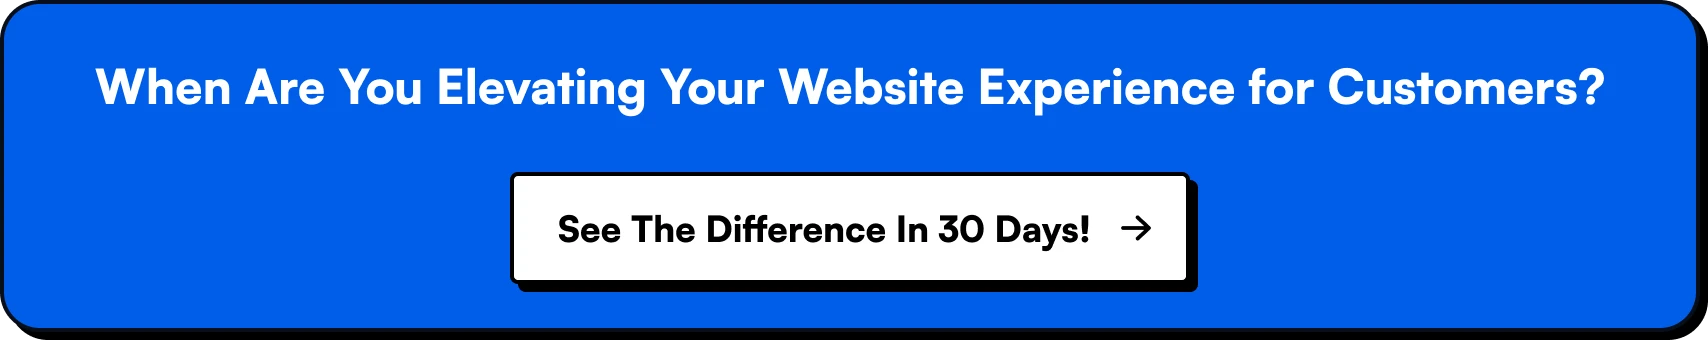 When Are You Elevating Your Website Experience for Customers